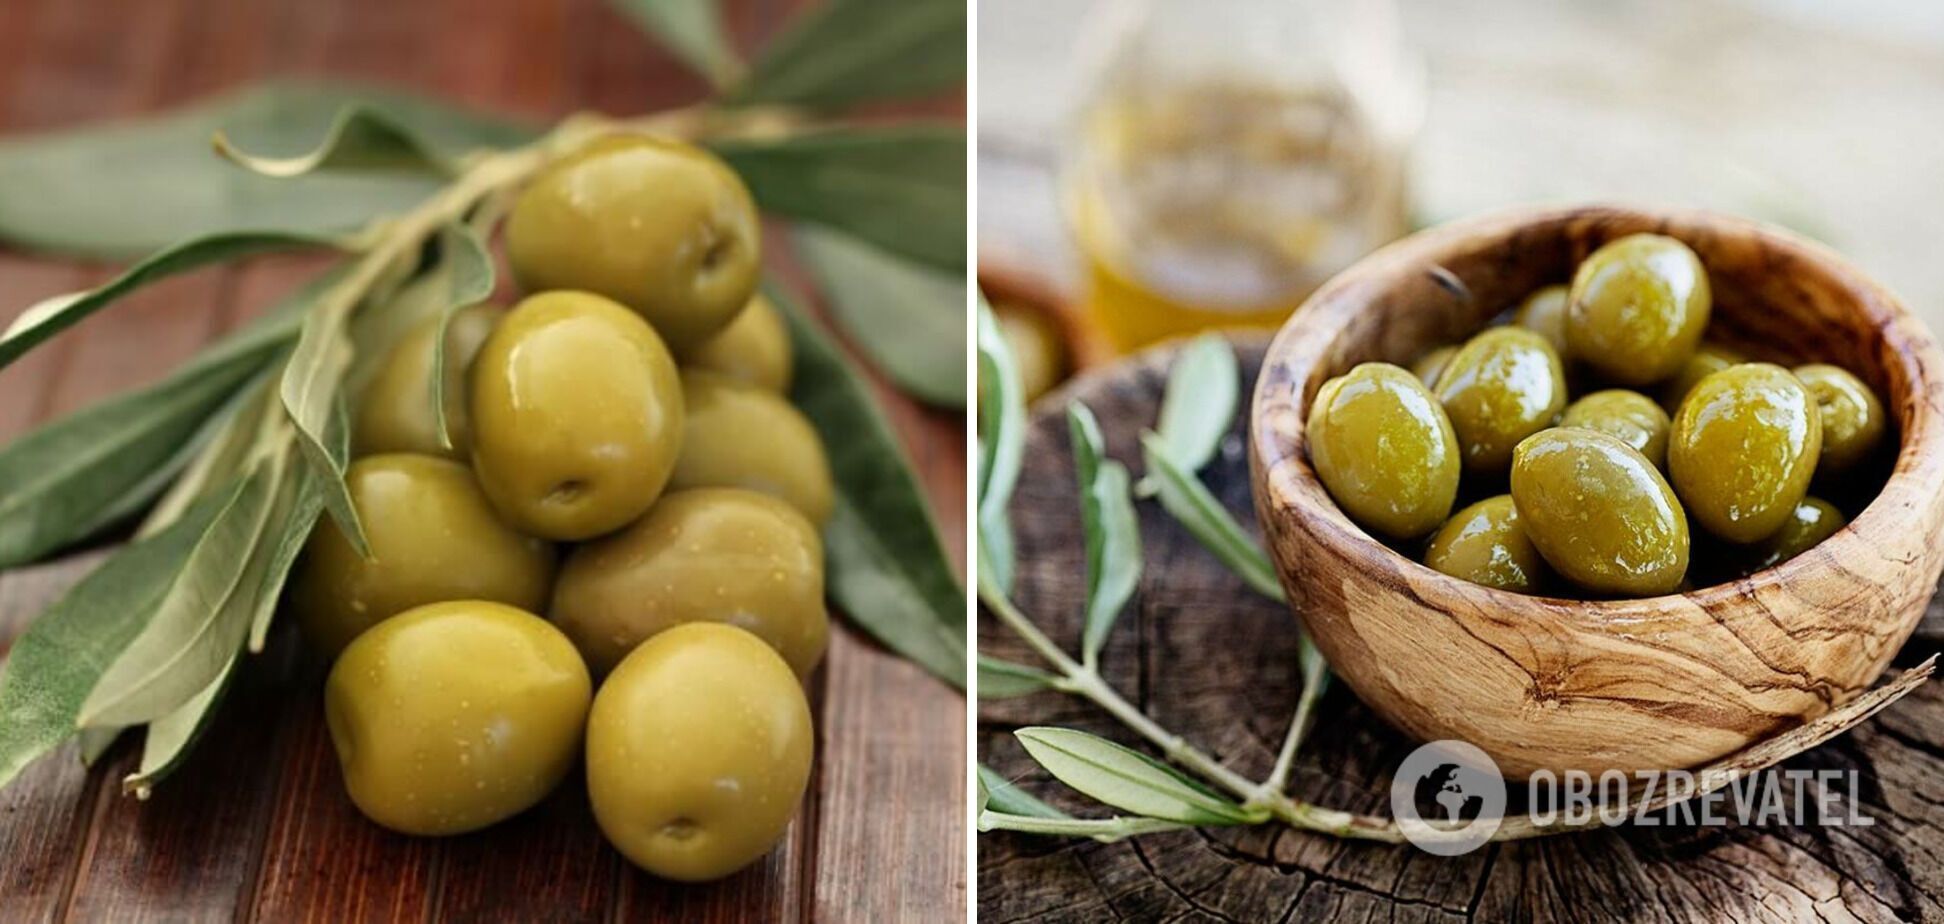 What are the benefits of olives